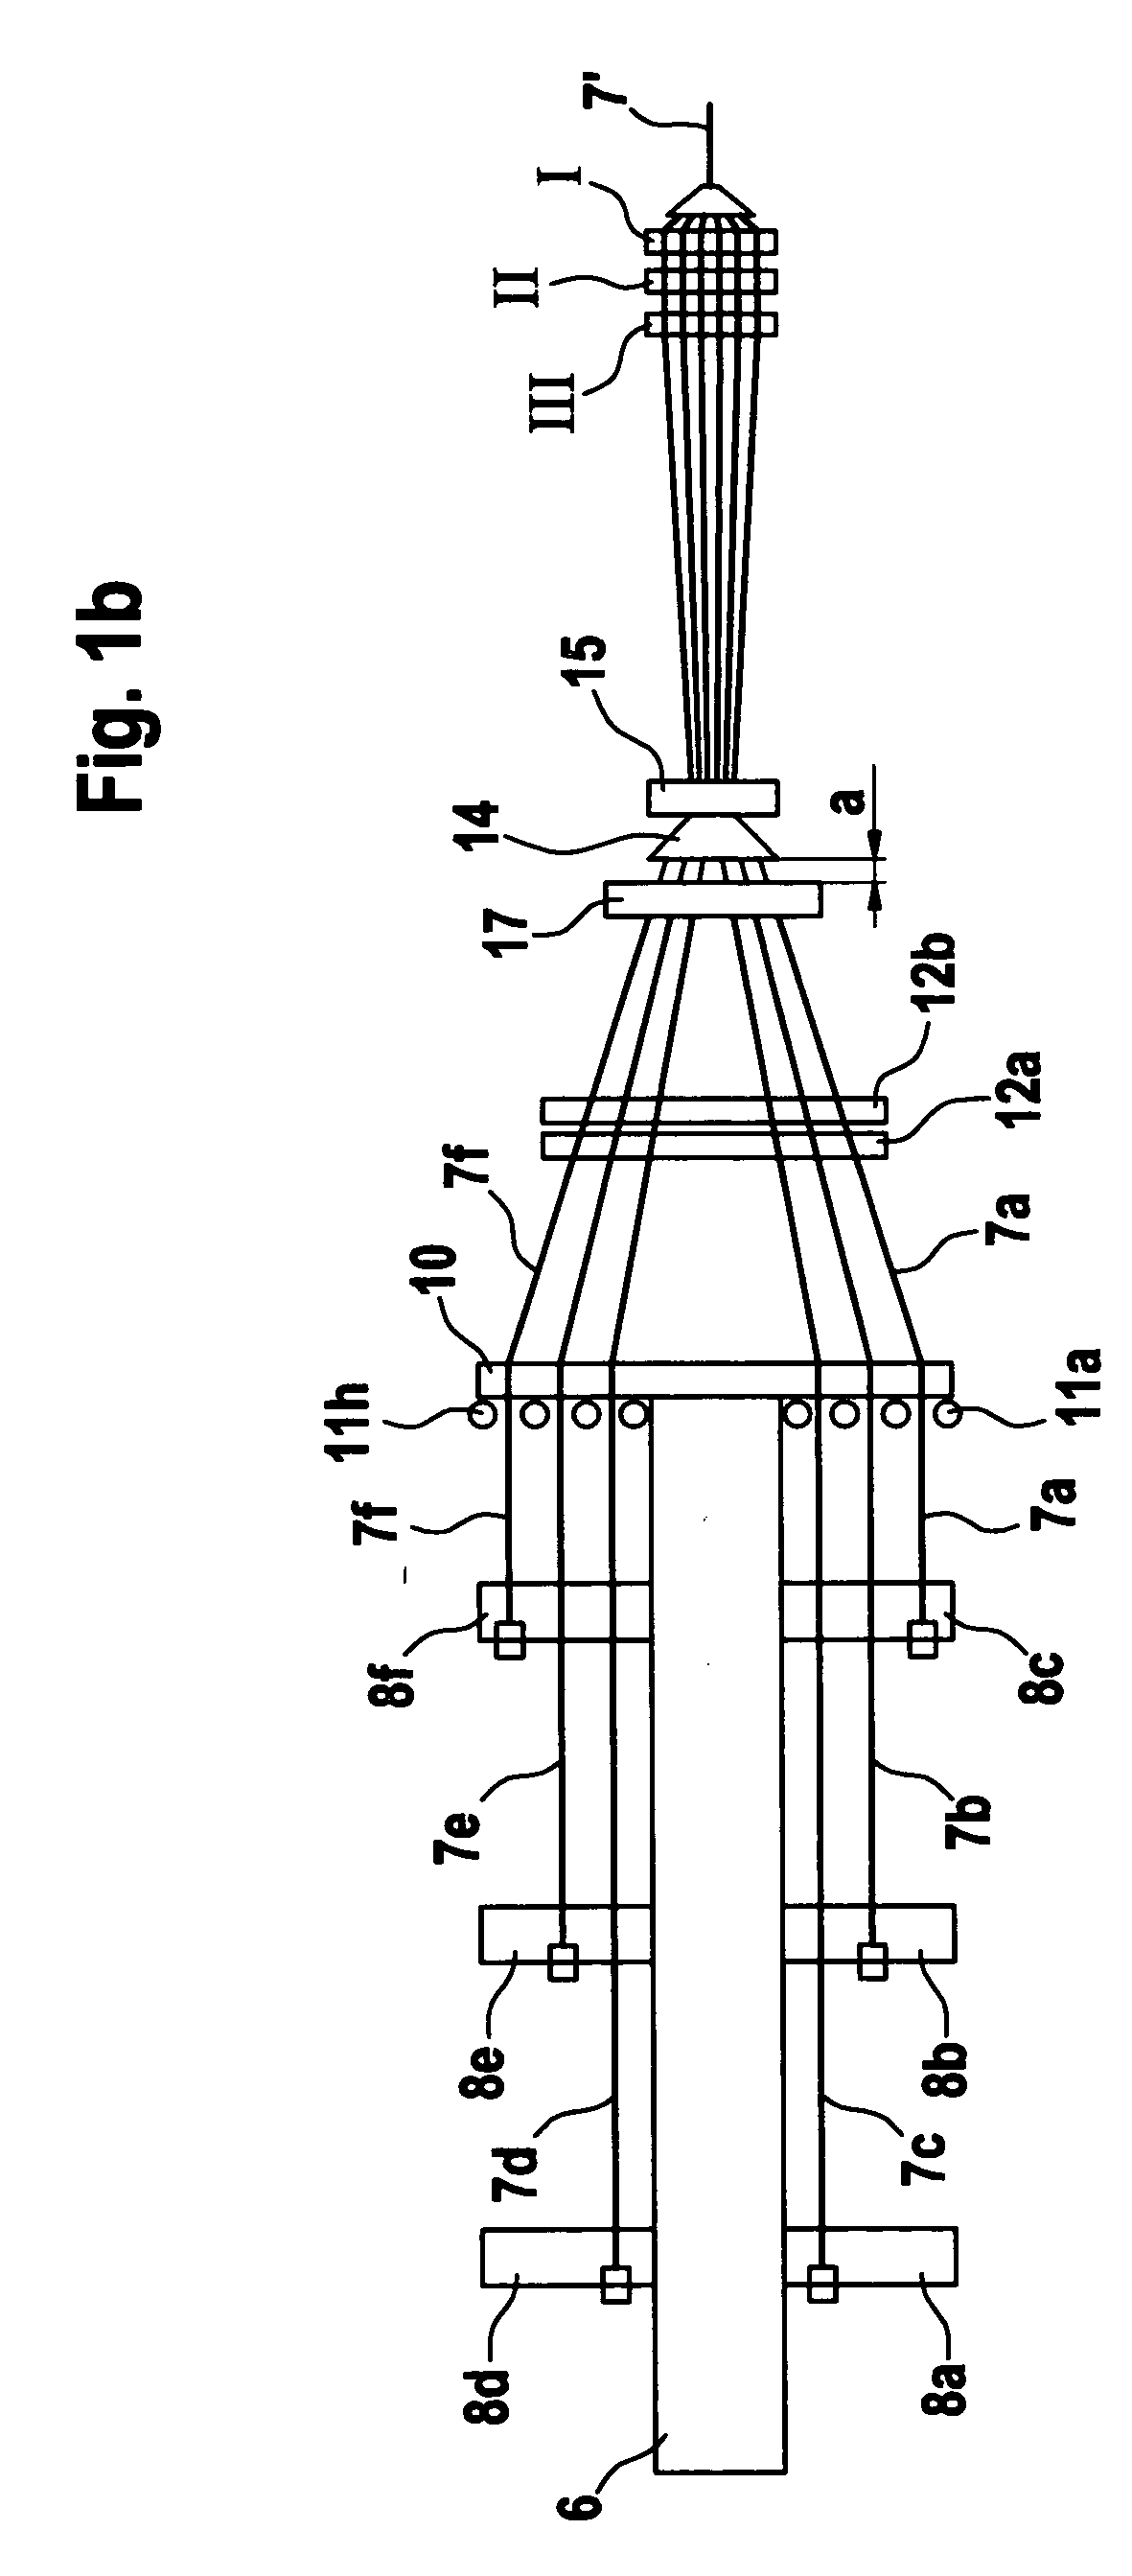 Apparatus at a draw frame for supplying fibre slivers to a drawing mechanism comprising at least two pairs of rollers